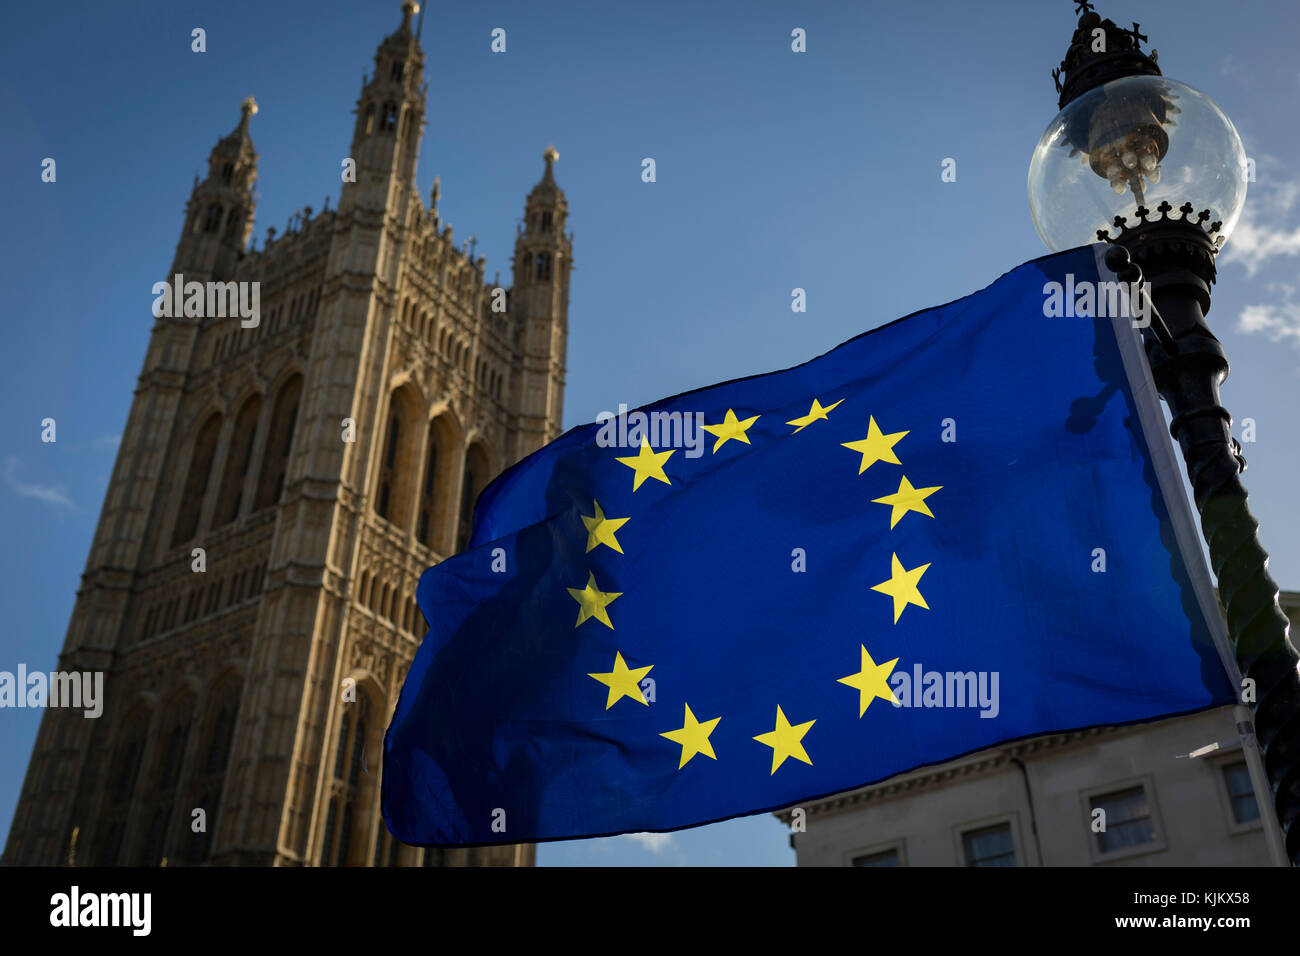 The stars of the EU flag fly over the Victoria Tower at the  Houses of Parliament in Westminster, seat of government and power of the United Kingdom during Brexit negotiations with Brussels, on 23rd November 2017, in London England. Stock Photo